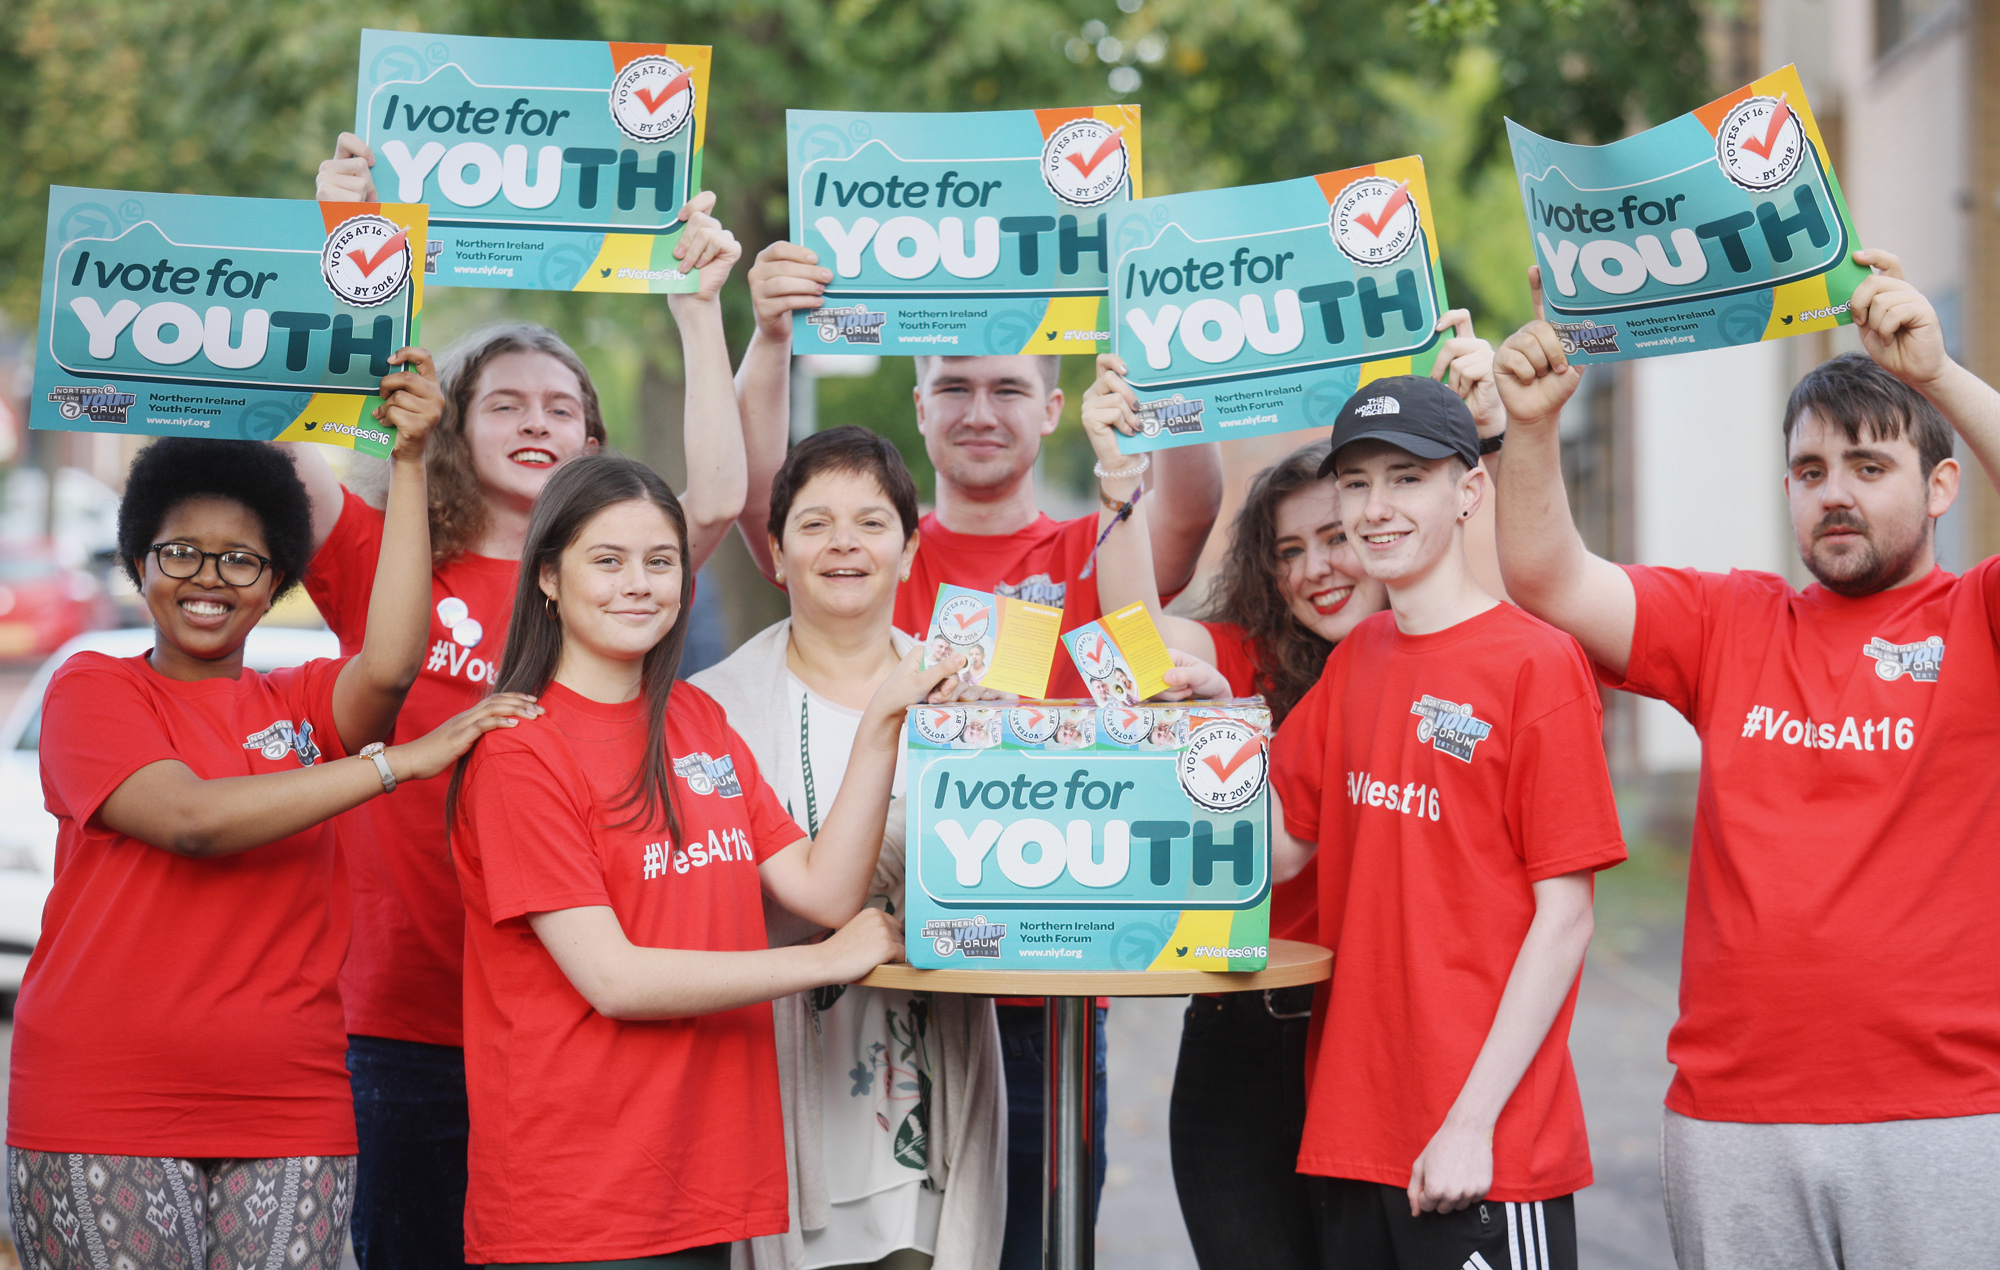 Commissioner for Children and Young People Koulla Yiasoum joins young people demanding the right to vote at 16